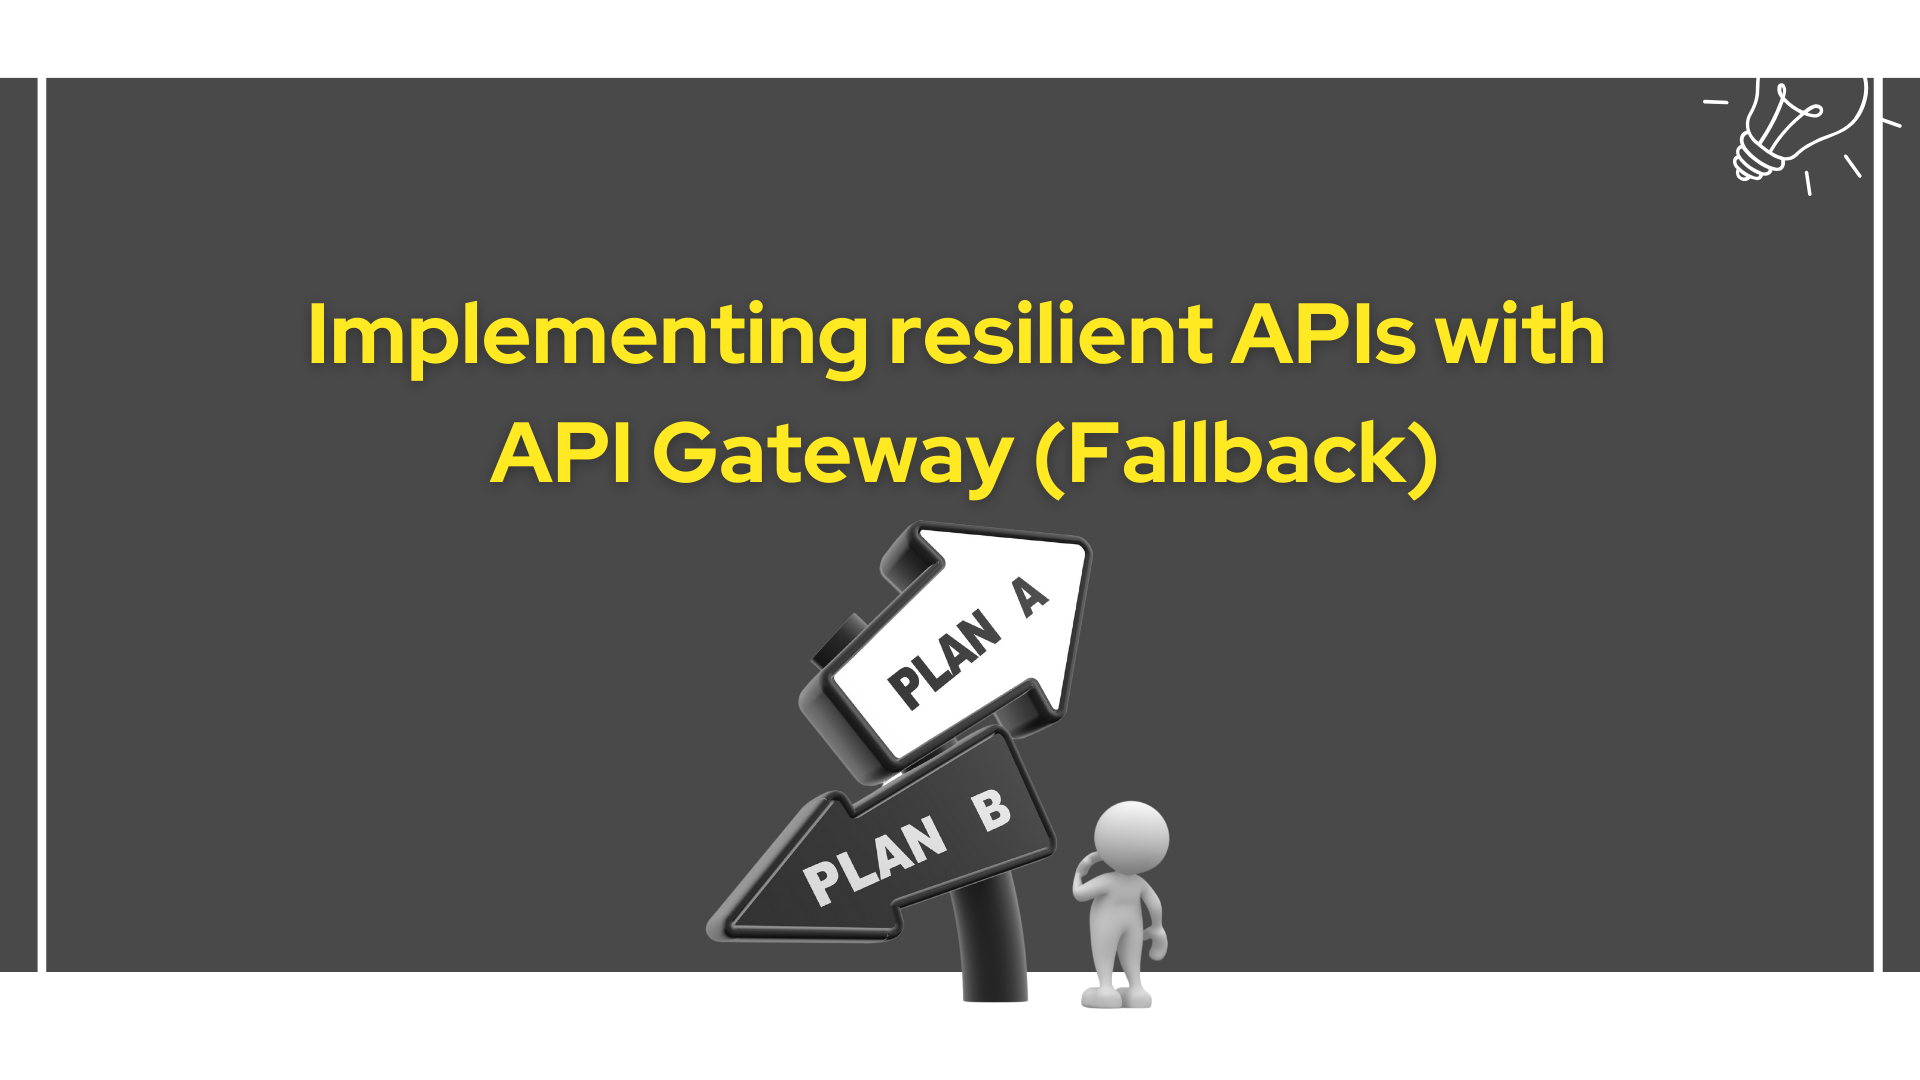 Implement Fallback with API Gateway